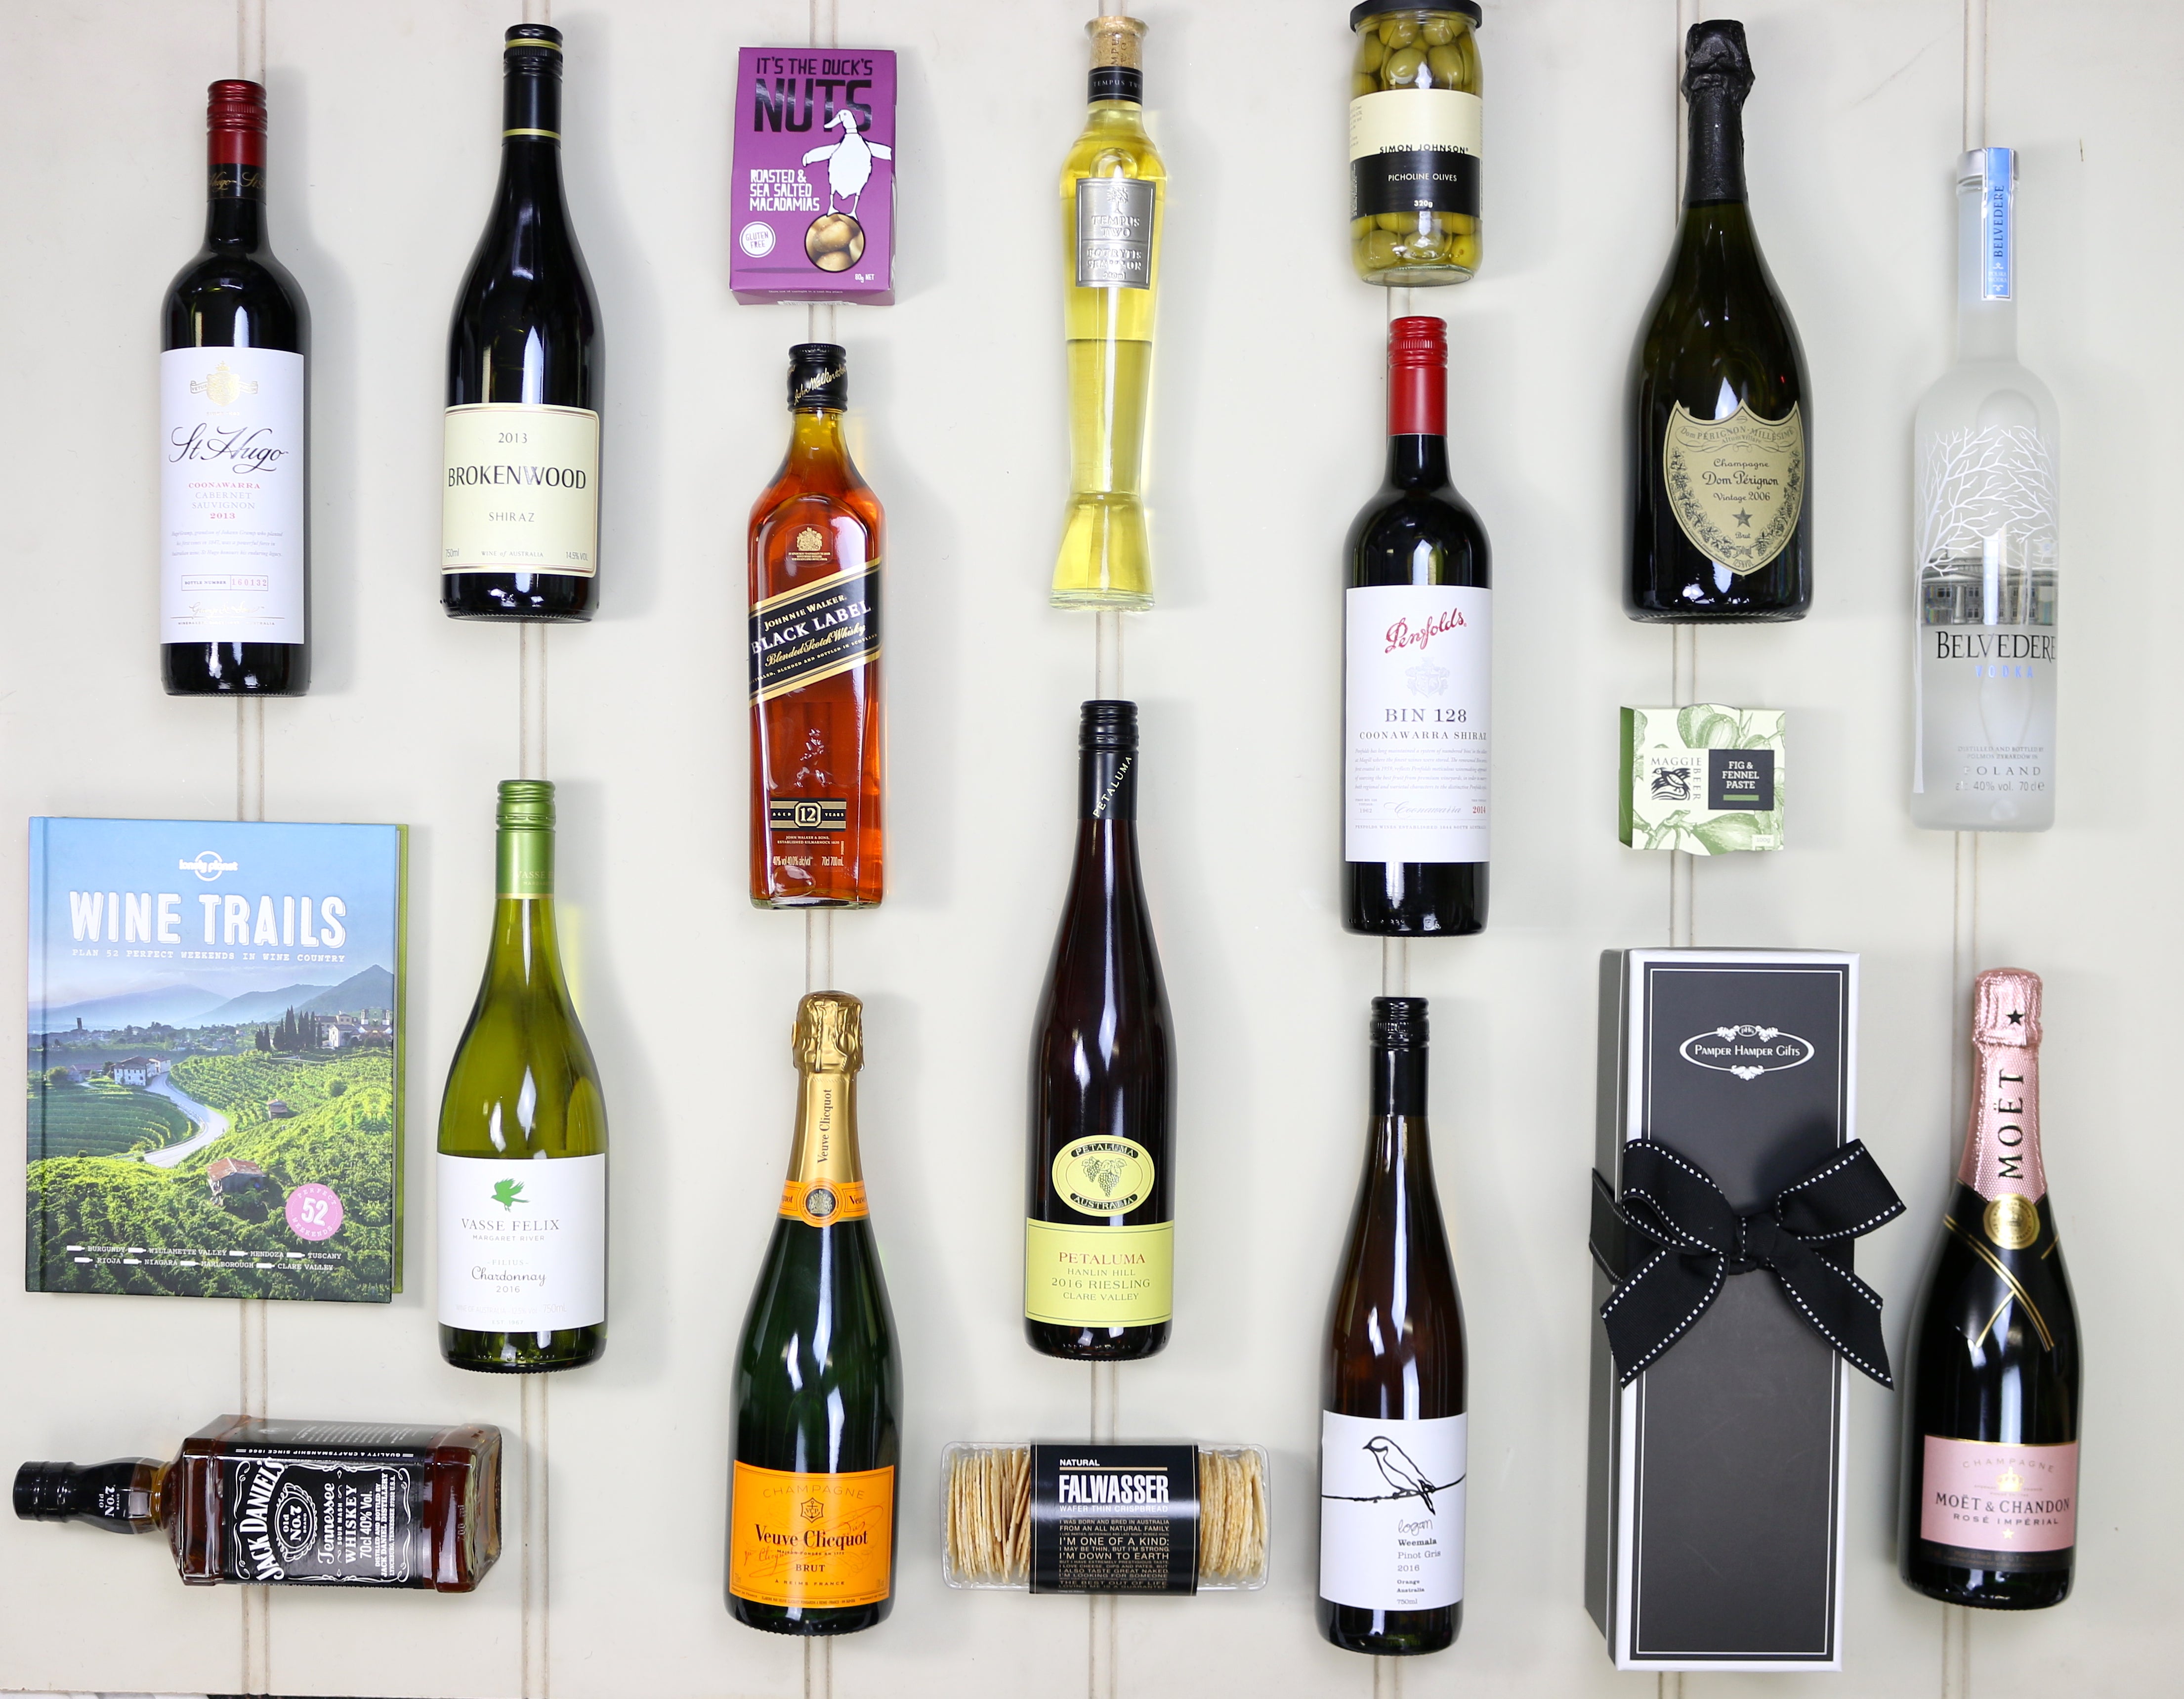 Send Liquor to Celebrate a Promotion - Spirited Gifts Blog